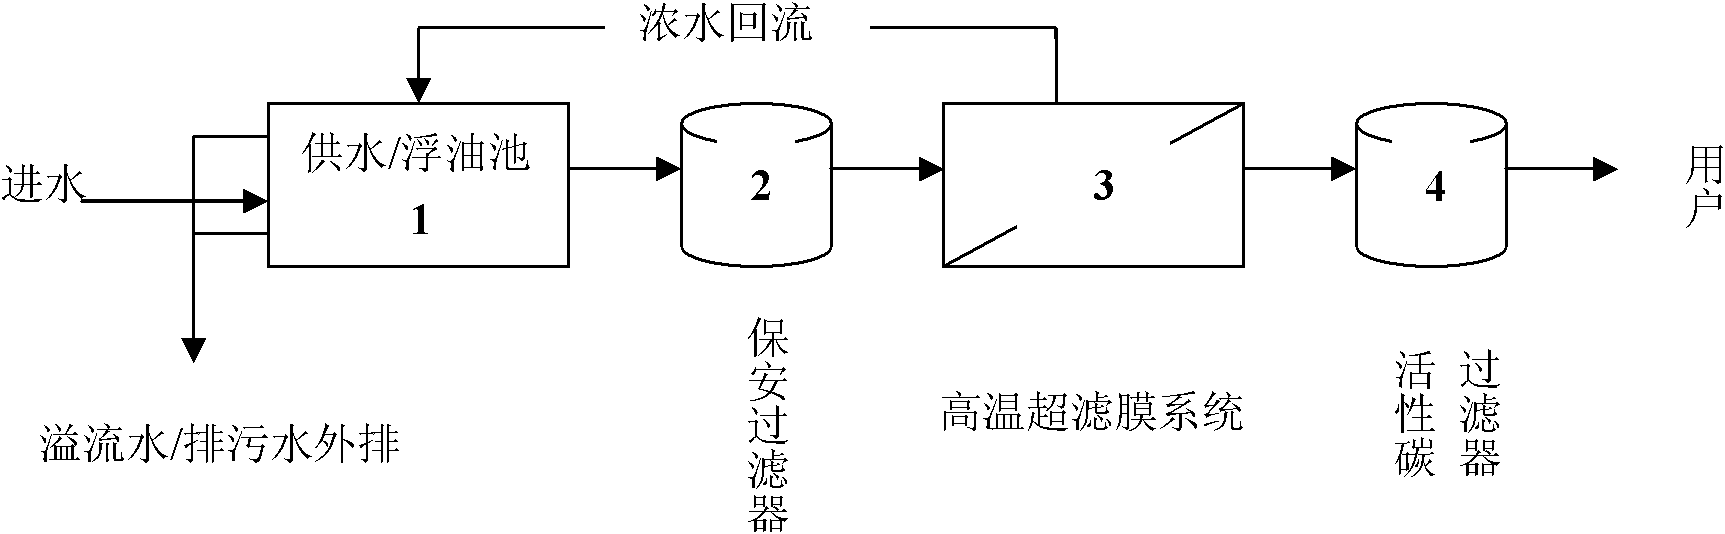 Process for purifying and recycling hot water by membrane method